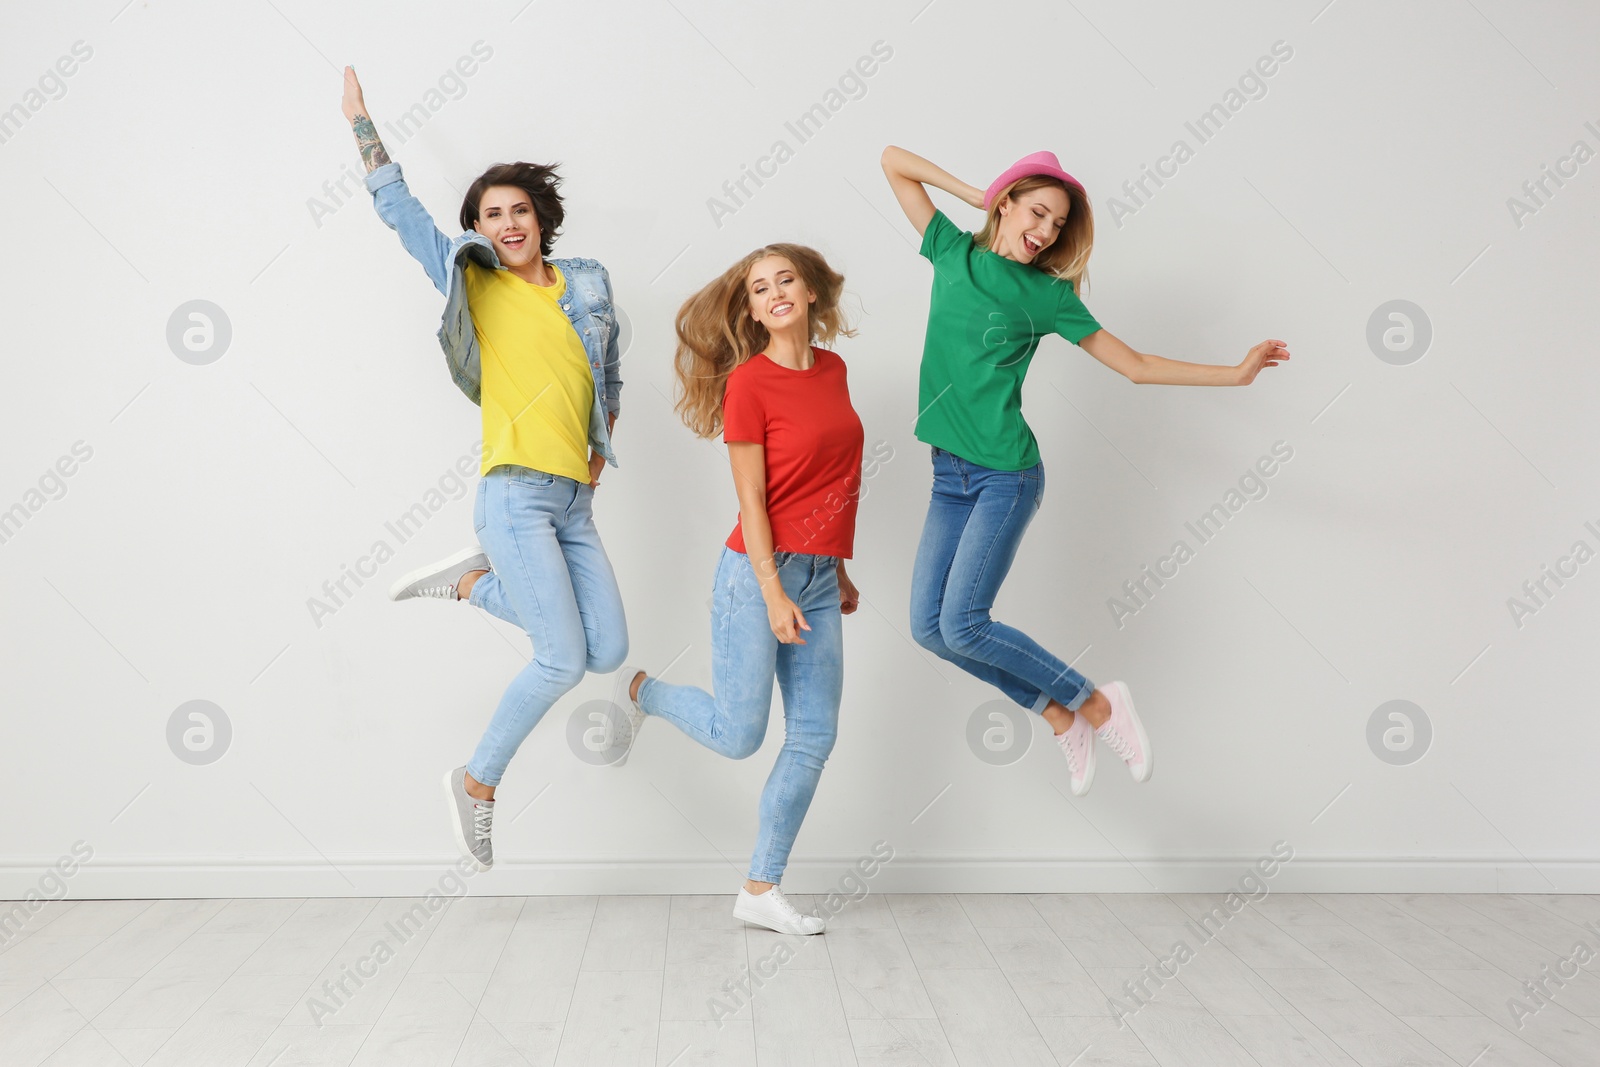 Photo of Group of young women in jeans and colorful t-shirts jumping near light wall